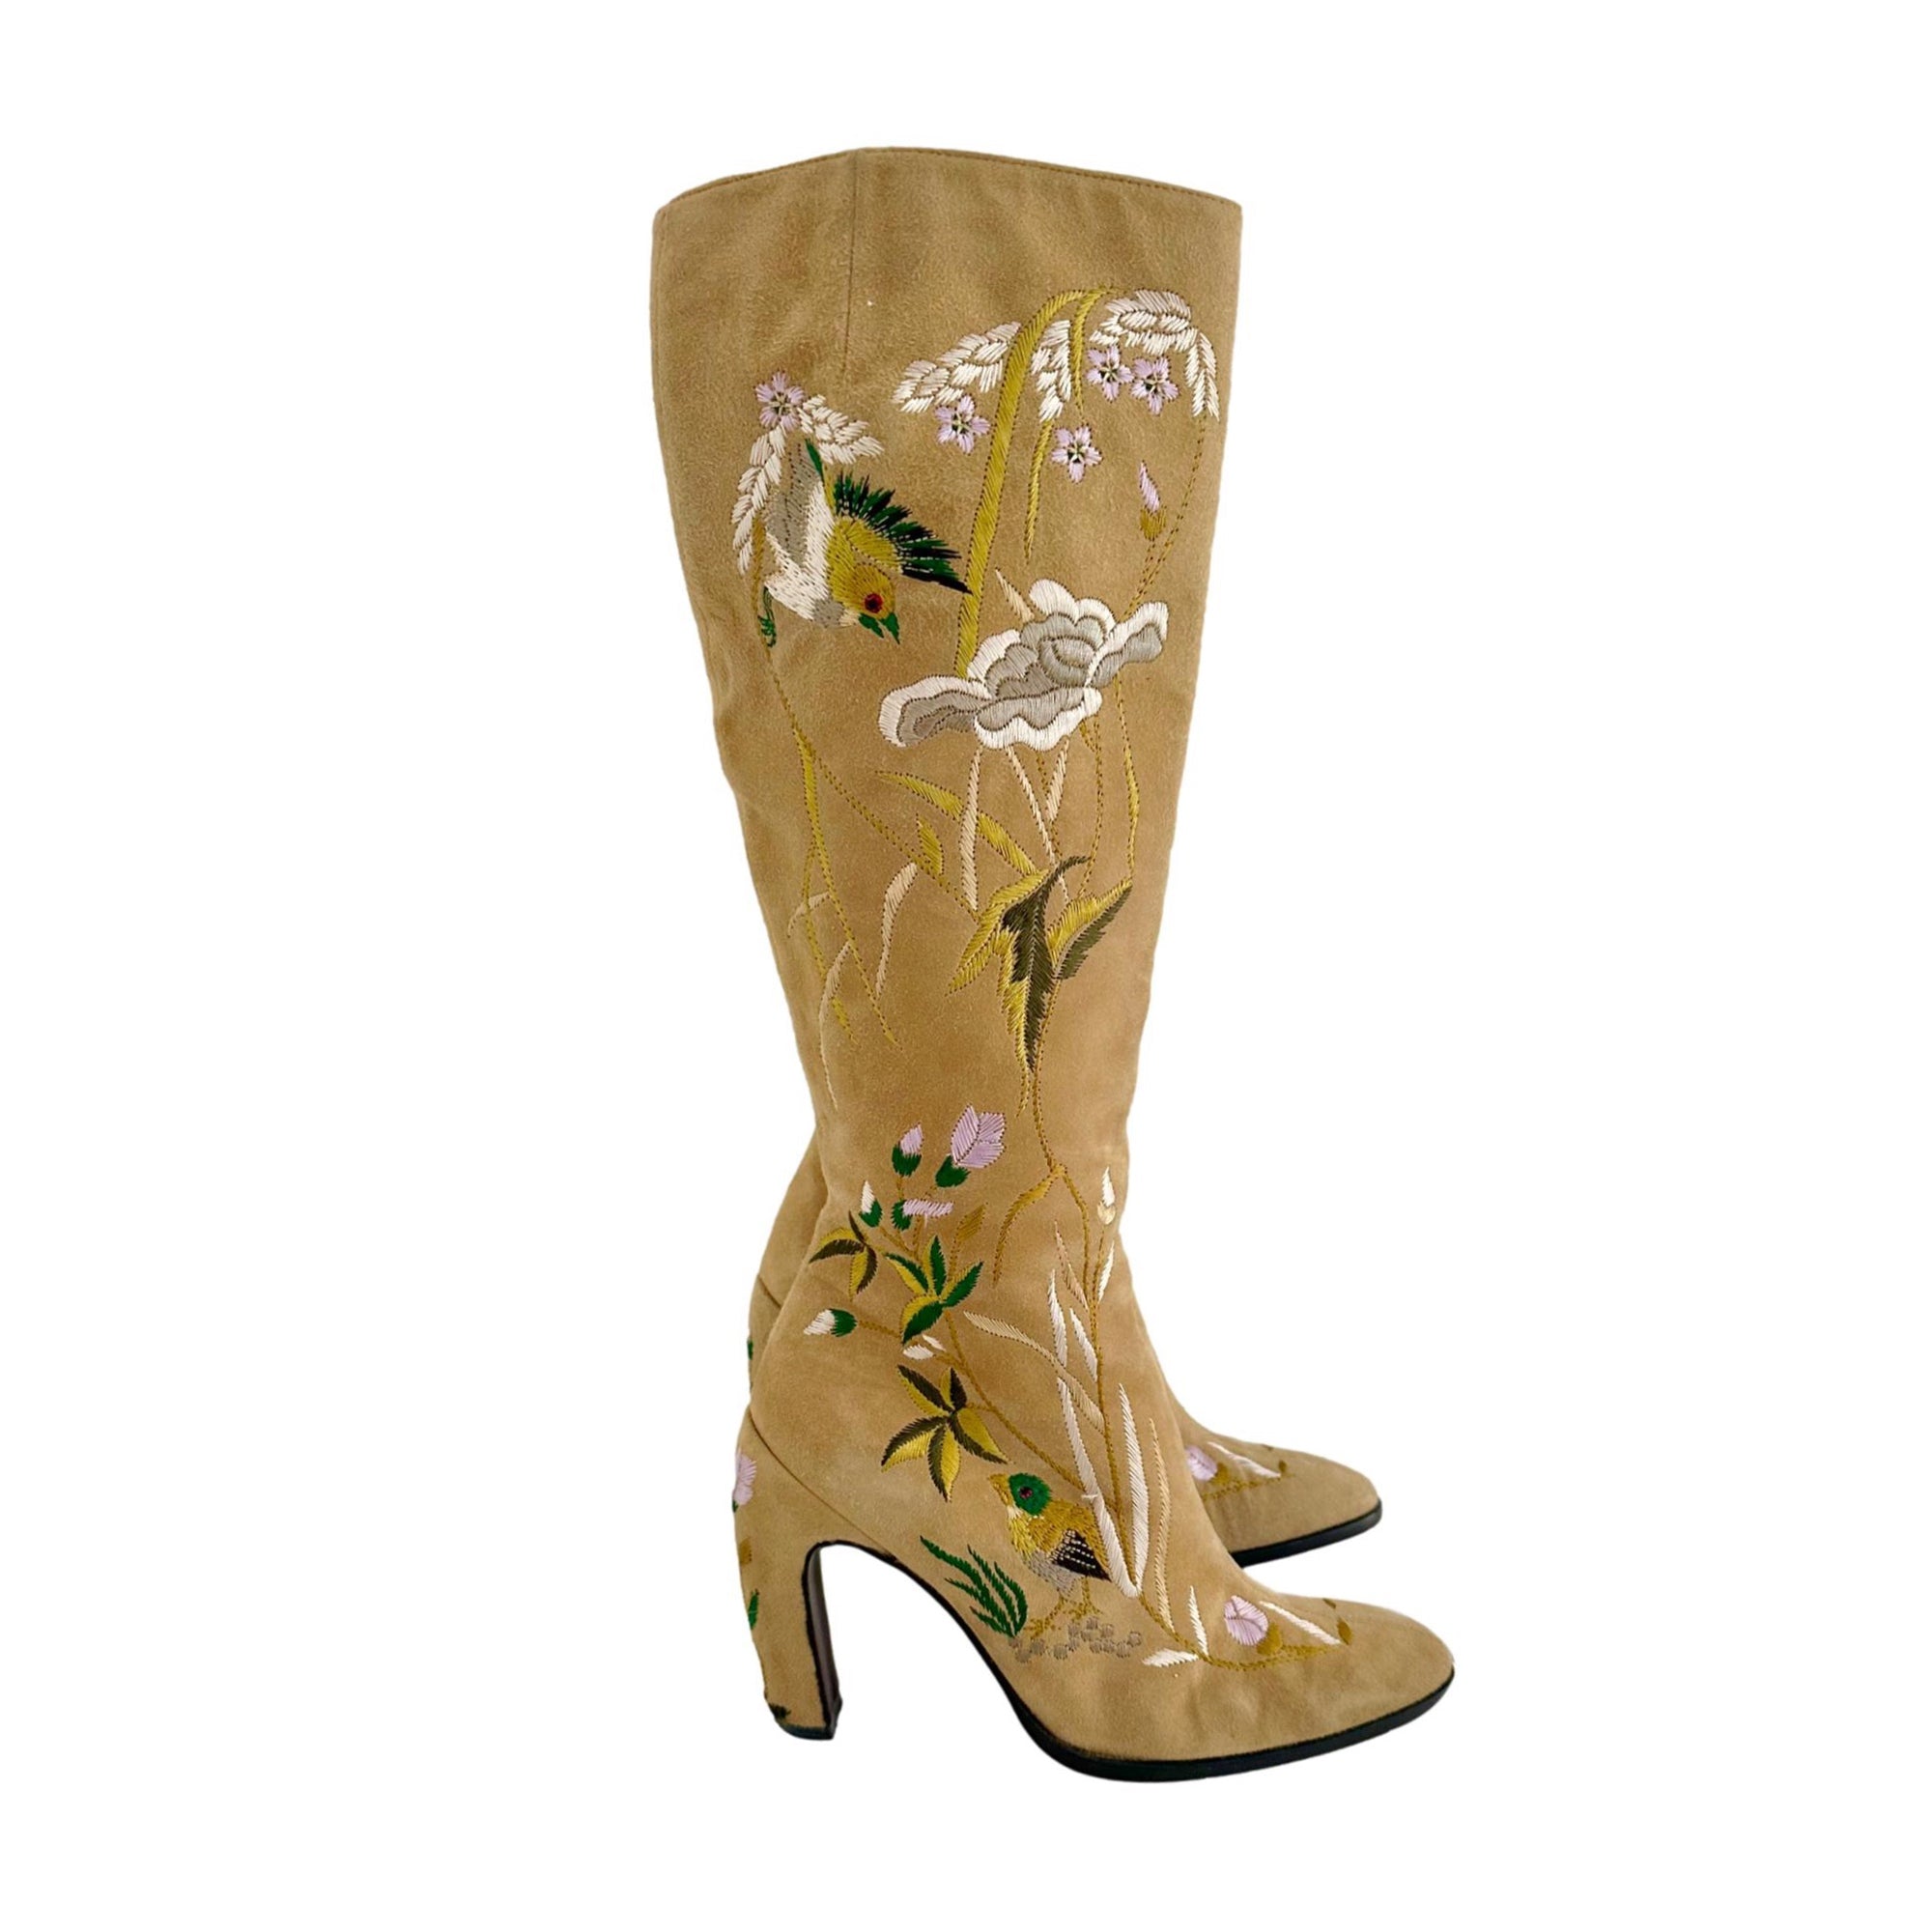 Fendi Tan Suede Embroidered Boots